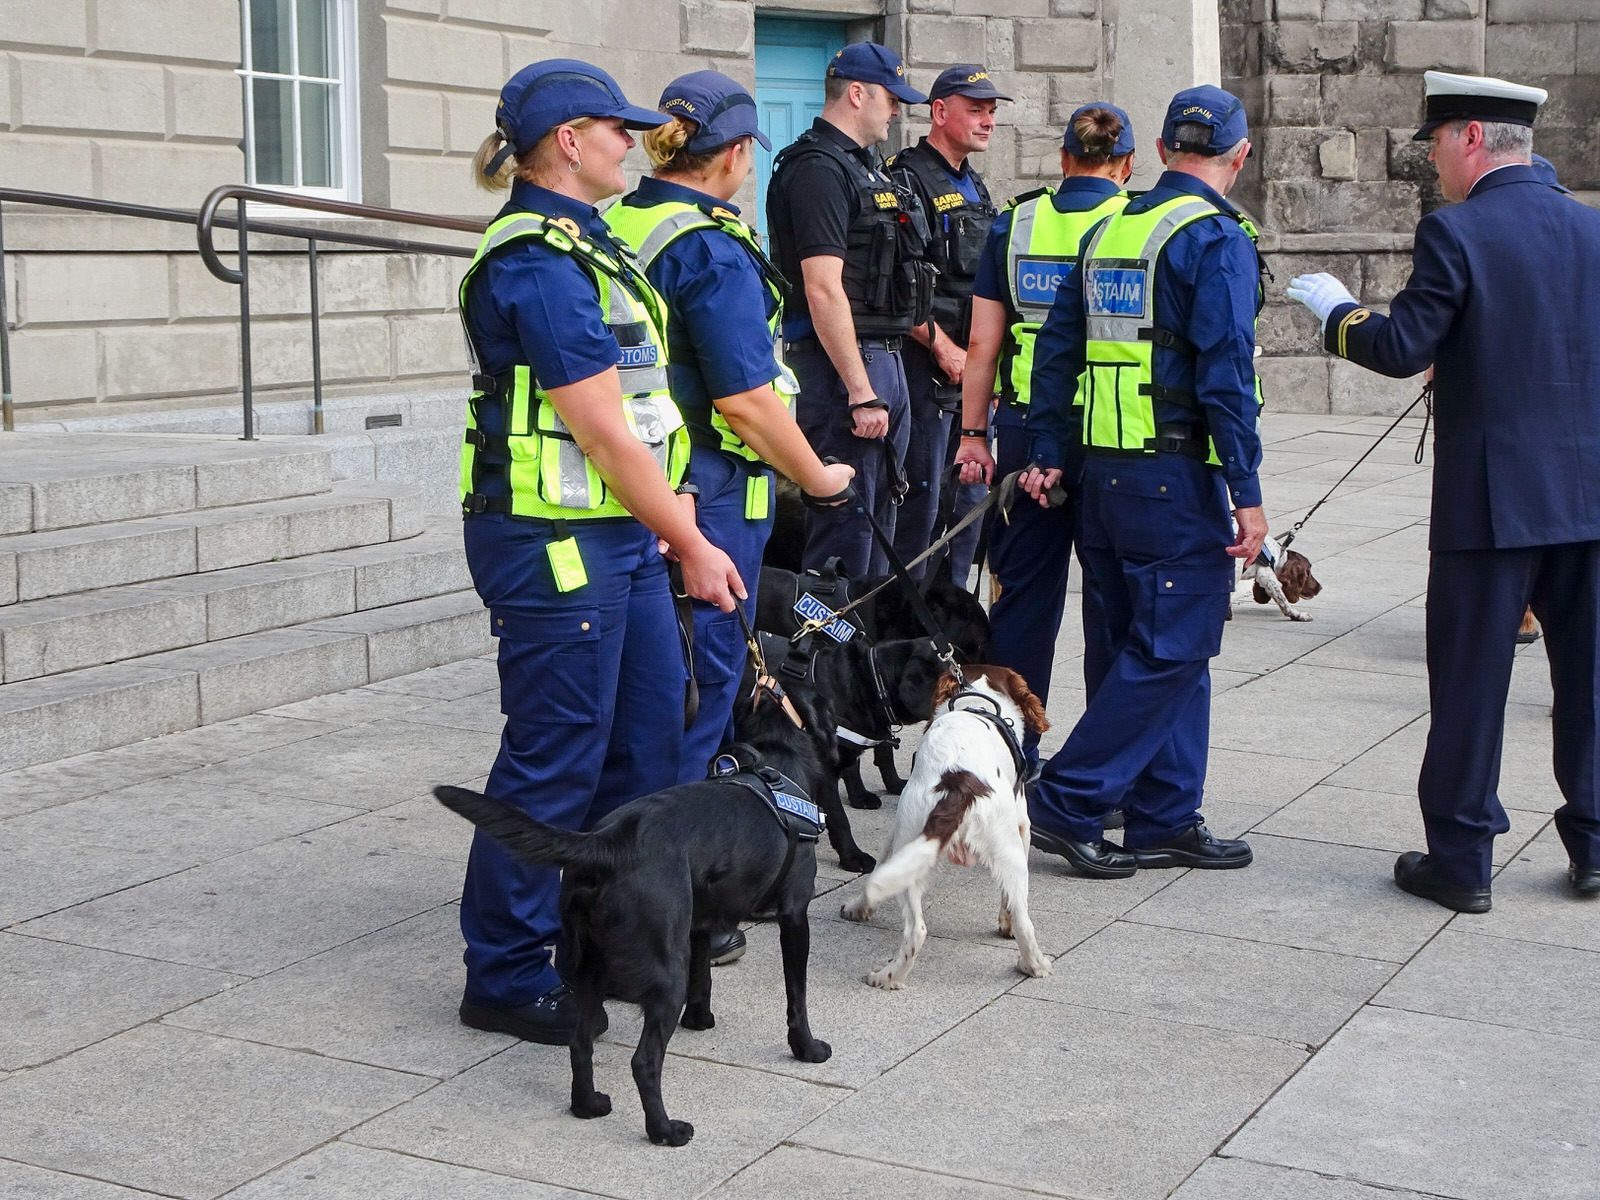 THE DOGS WHO WORK FOR THE IRISH CUSTOMS SERVICE [INVITED THE PRESS TO A PHOTO-SHOOT]-225742-1